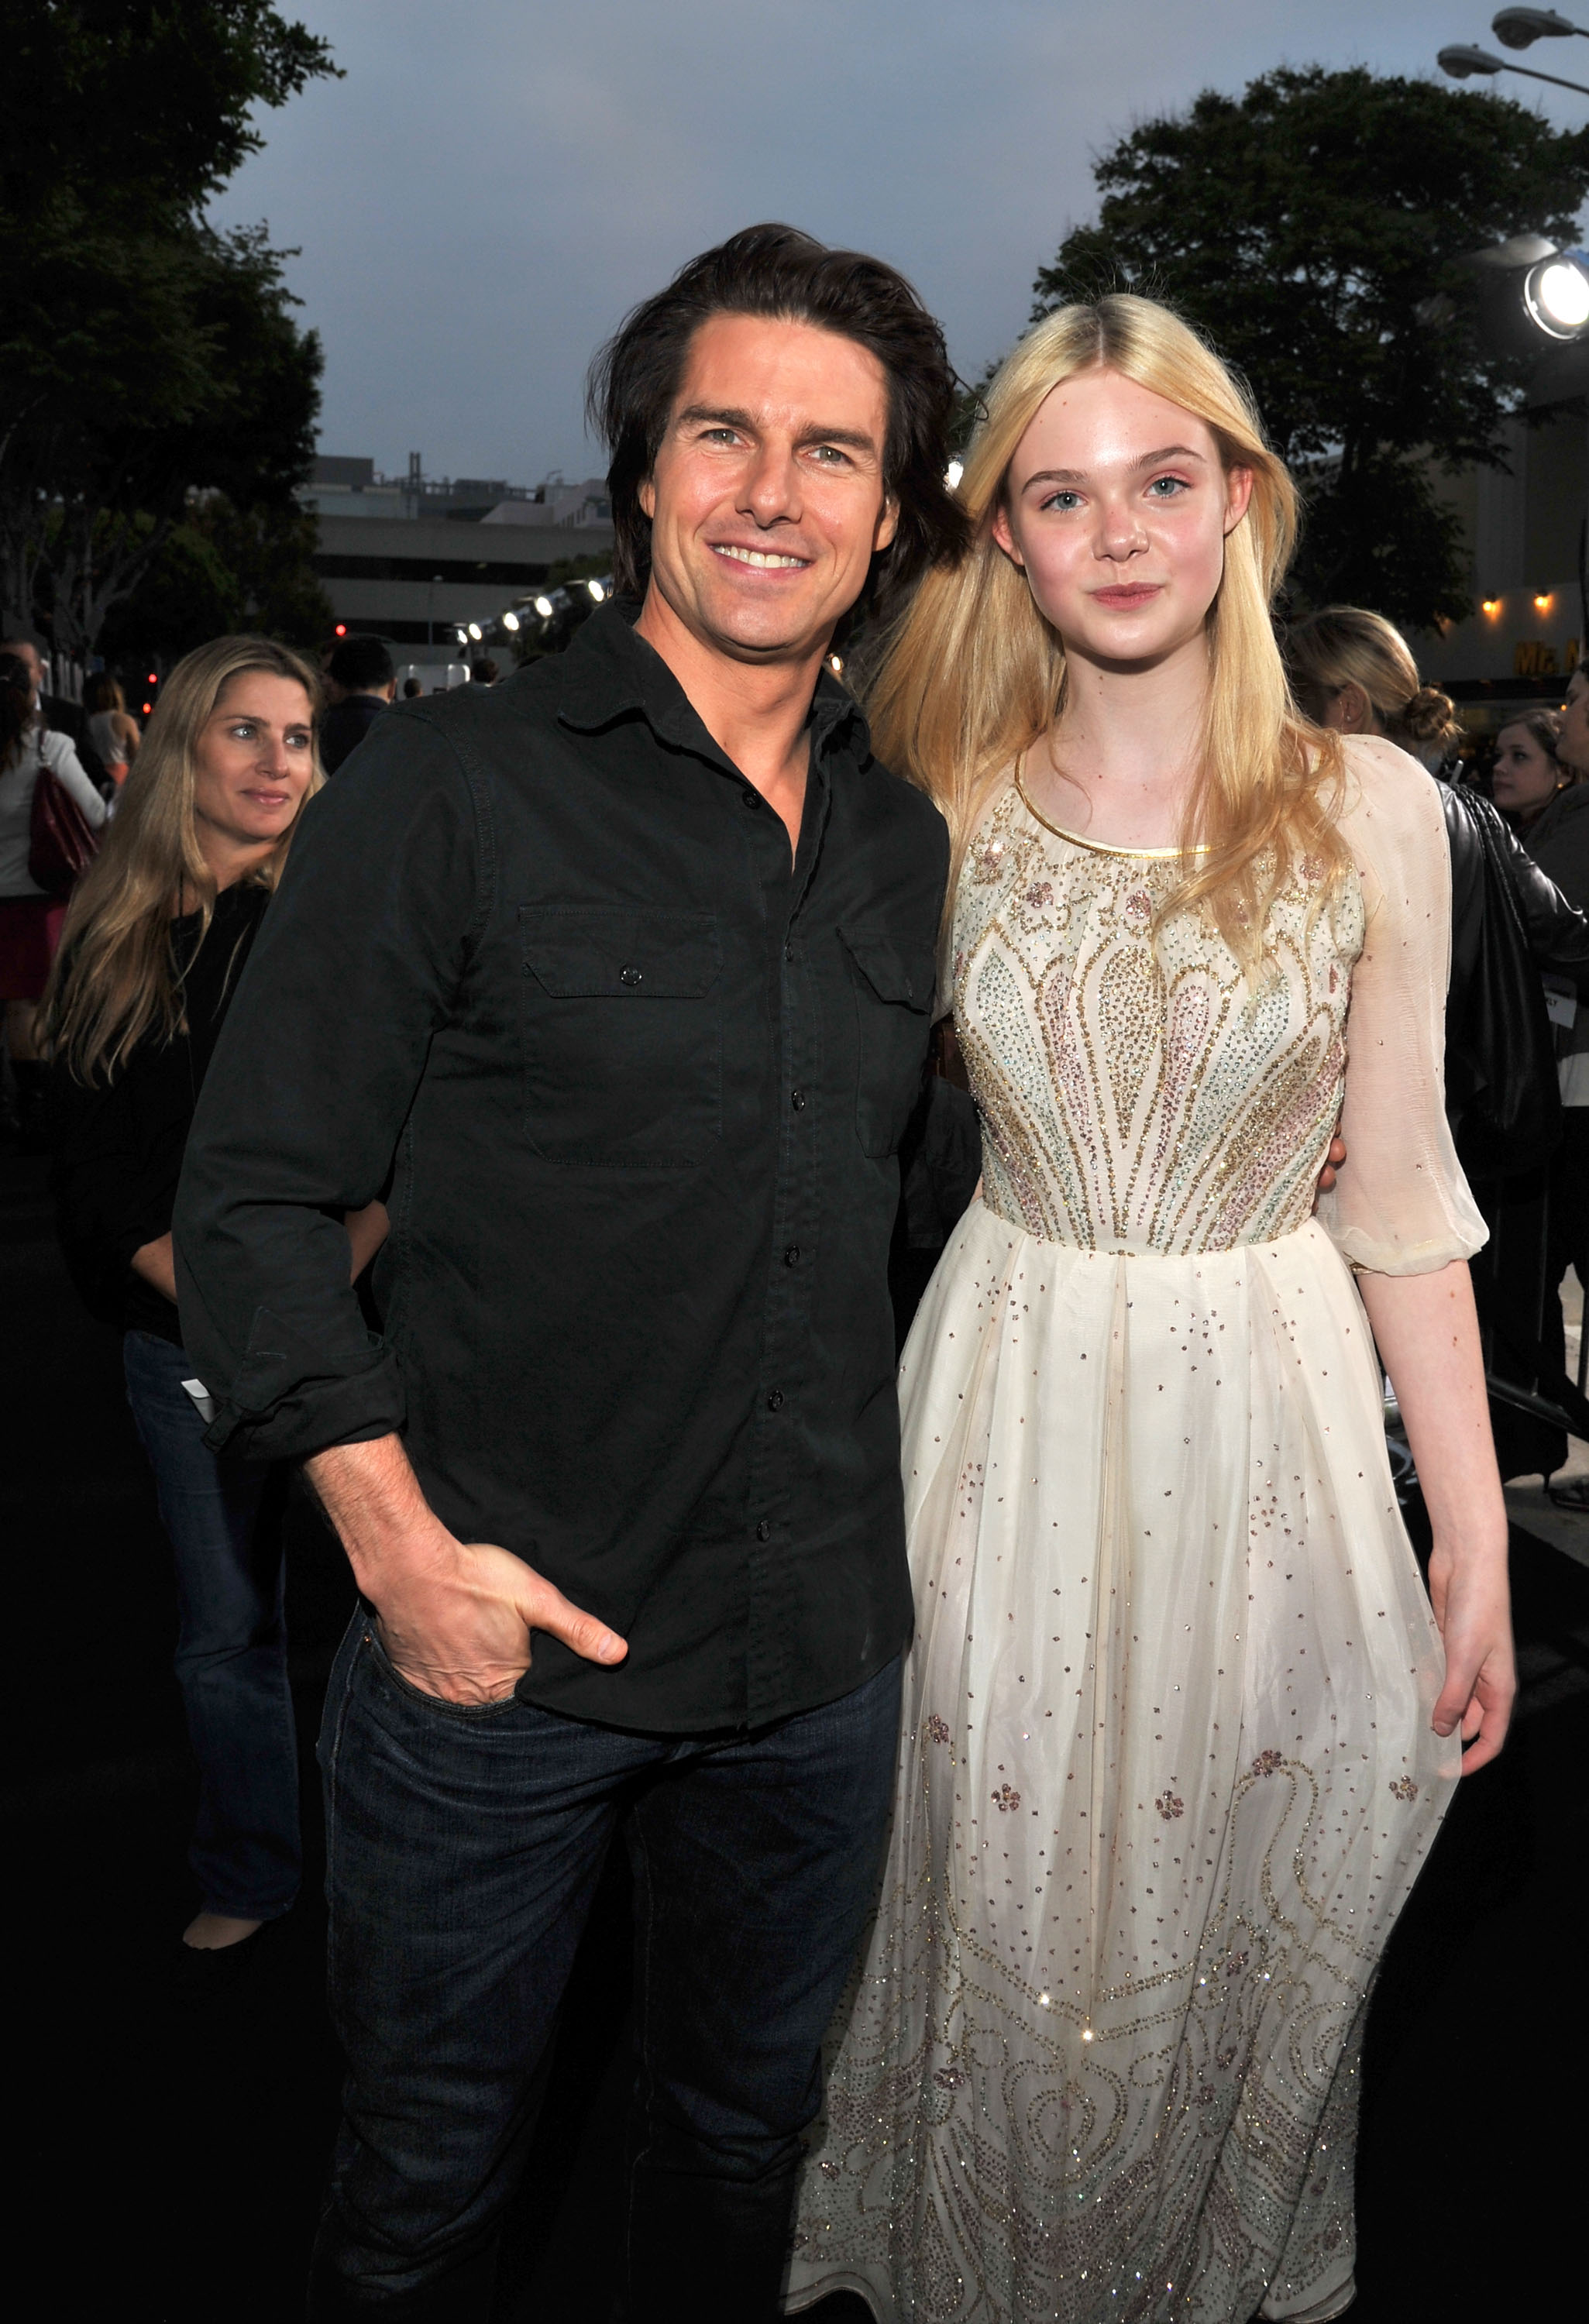 Tom Cruise and Elle Fanning at the "Super 8" Los Angeles premiere on June 8, 2011, in Westwood, California | Source: Getty Images